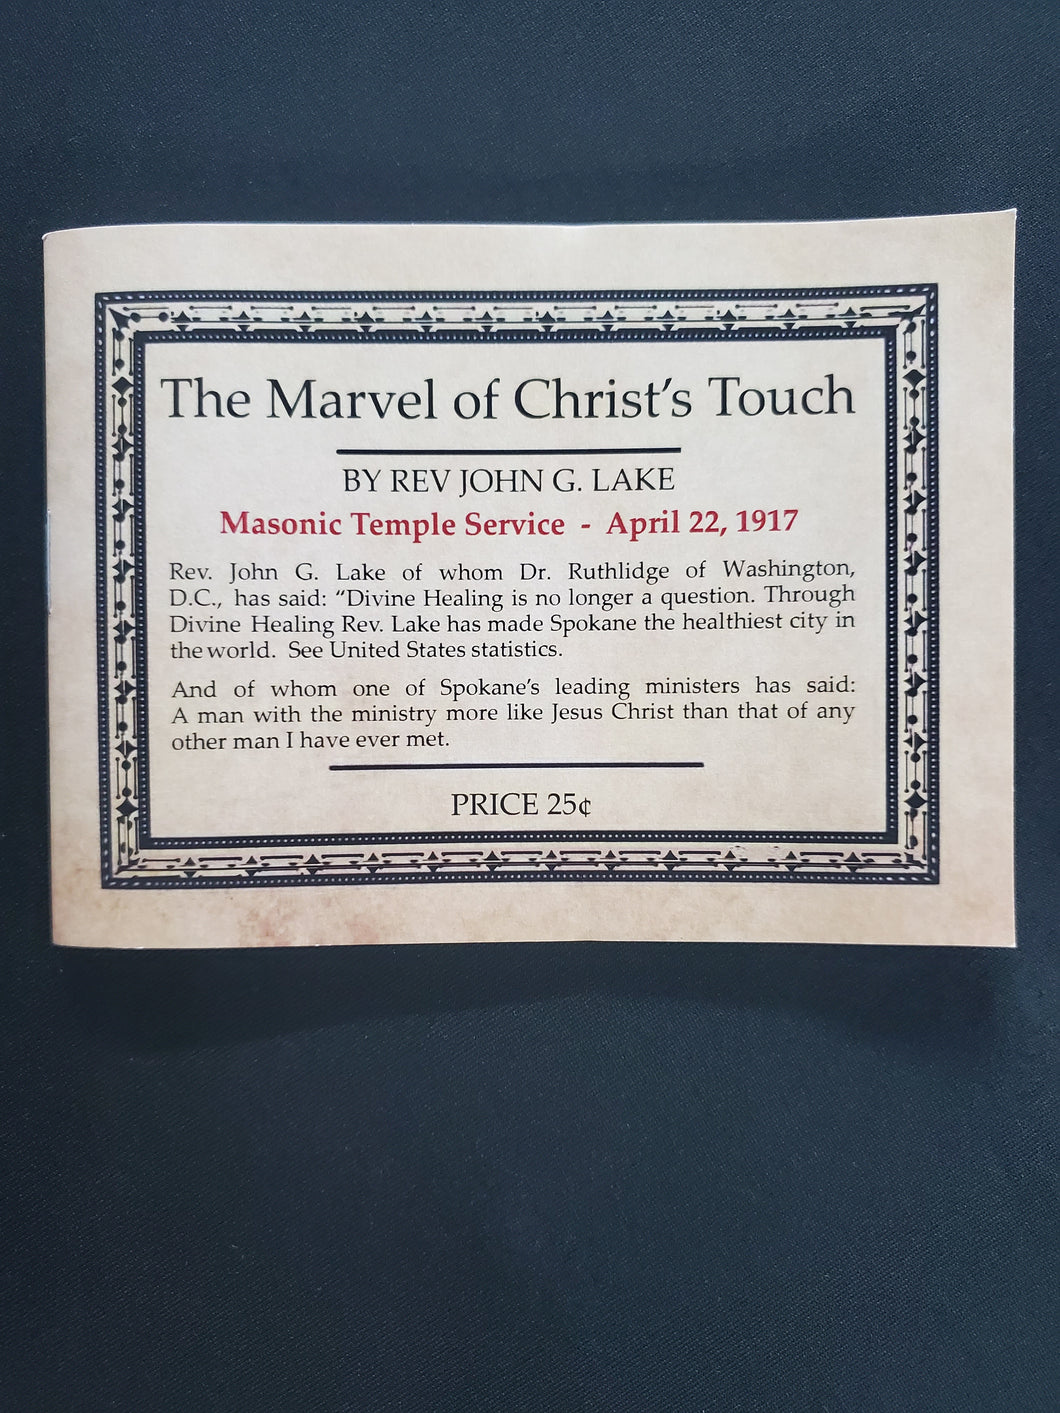 The Marvel of Christ's Touch